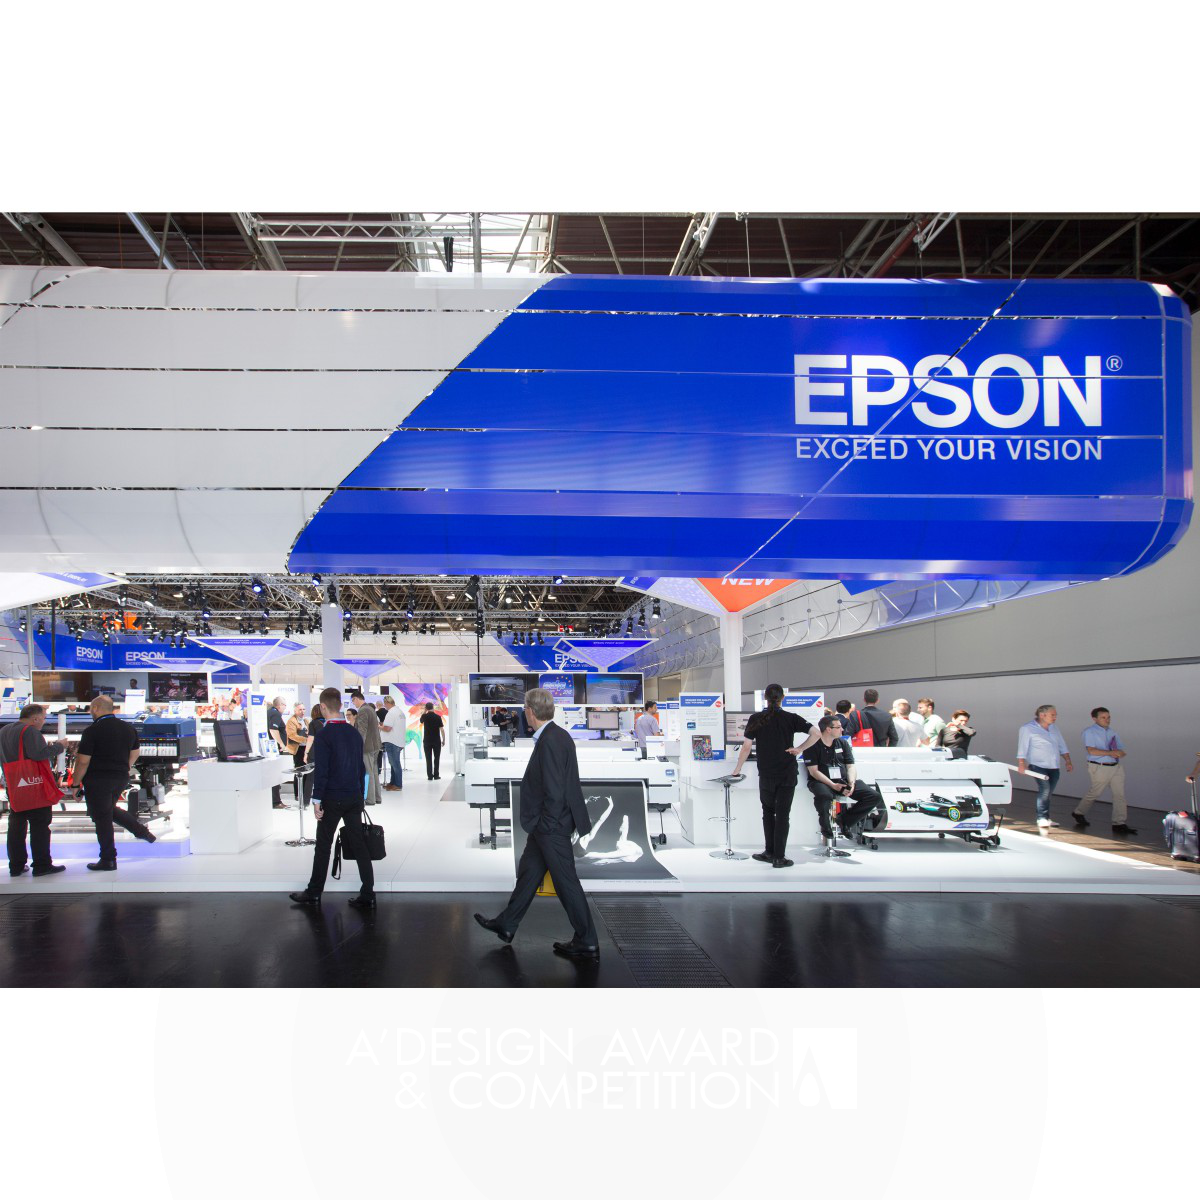 EPSON Drupa2016 Exhibition stand by Ton Wittebol